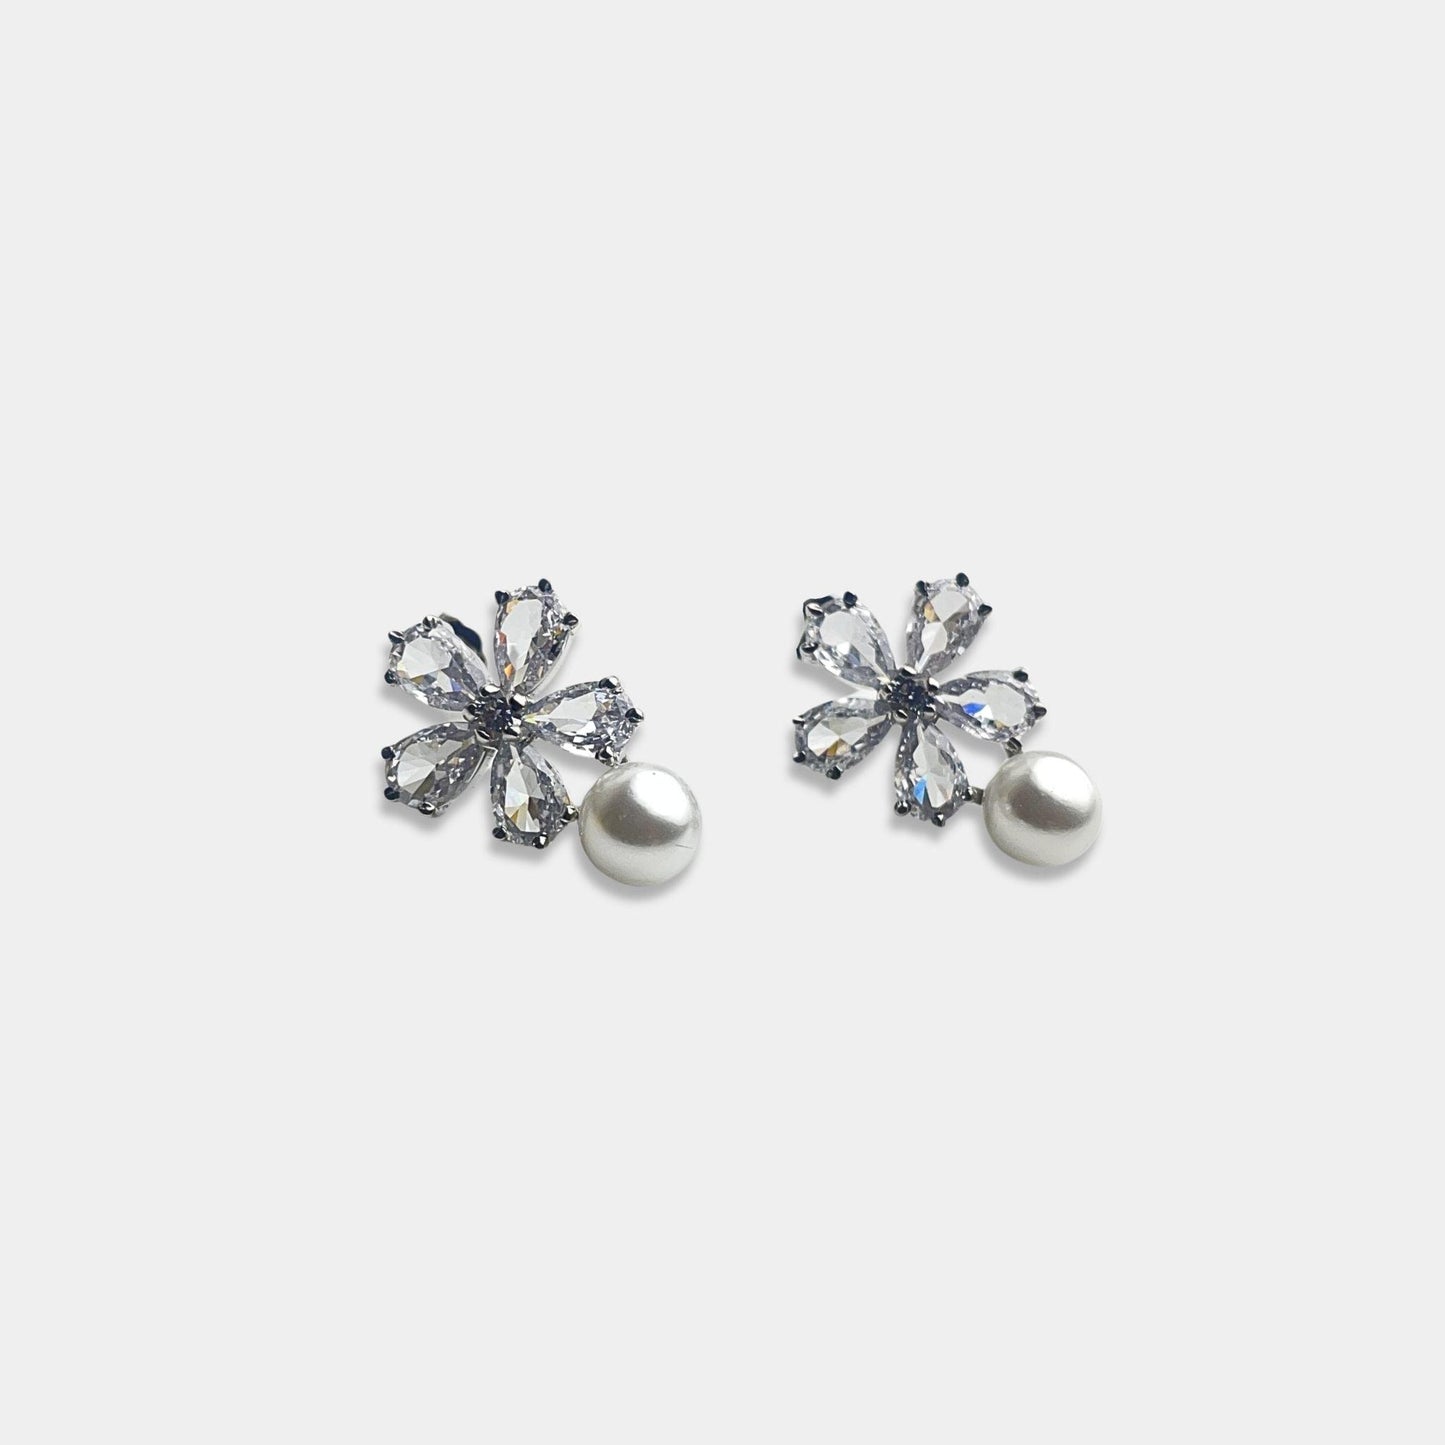 Elevate your style with our exquisite sterling silver Star Earrings inspired by the silver Nebula Floral.